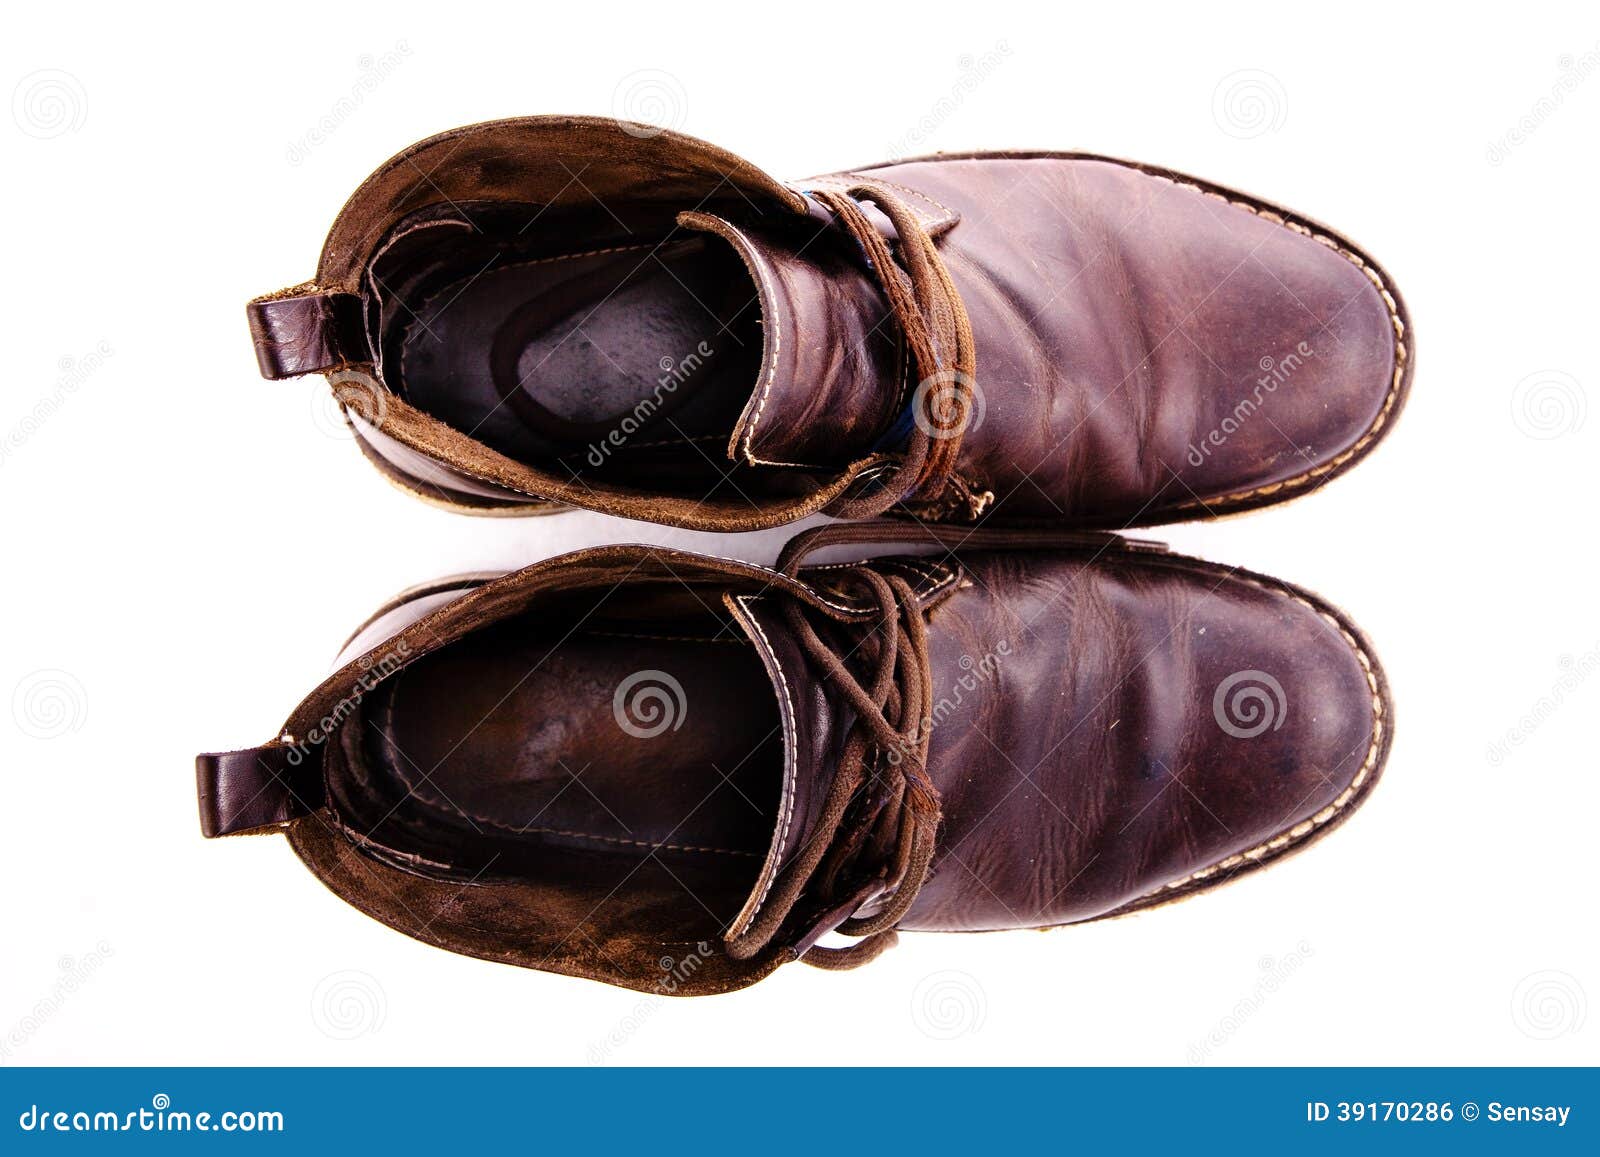 Old fashioned brown boots stock photo. Image of duty - 39170286